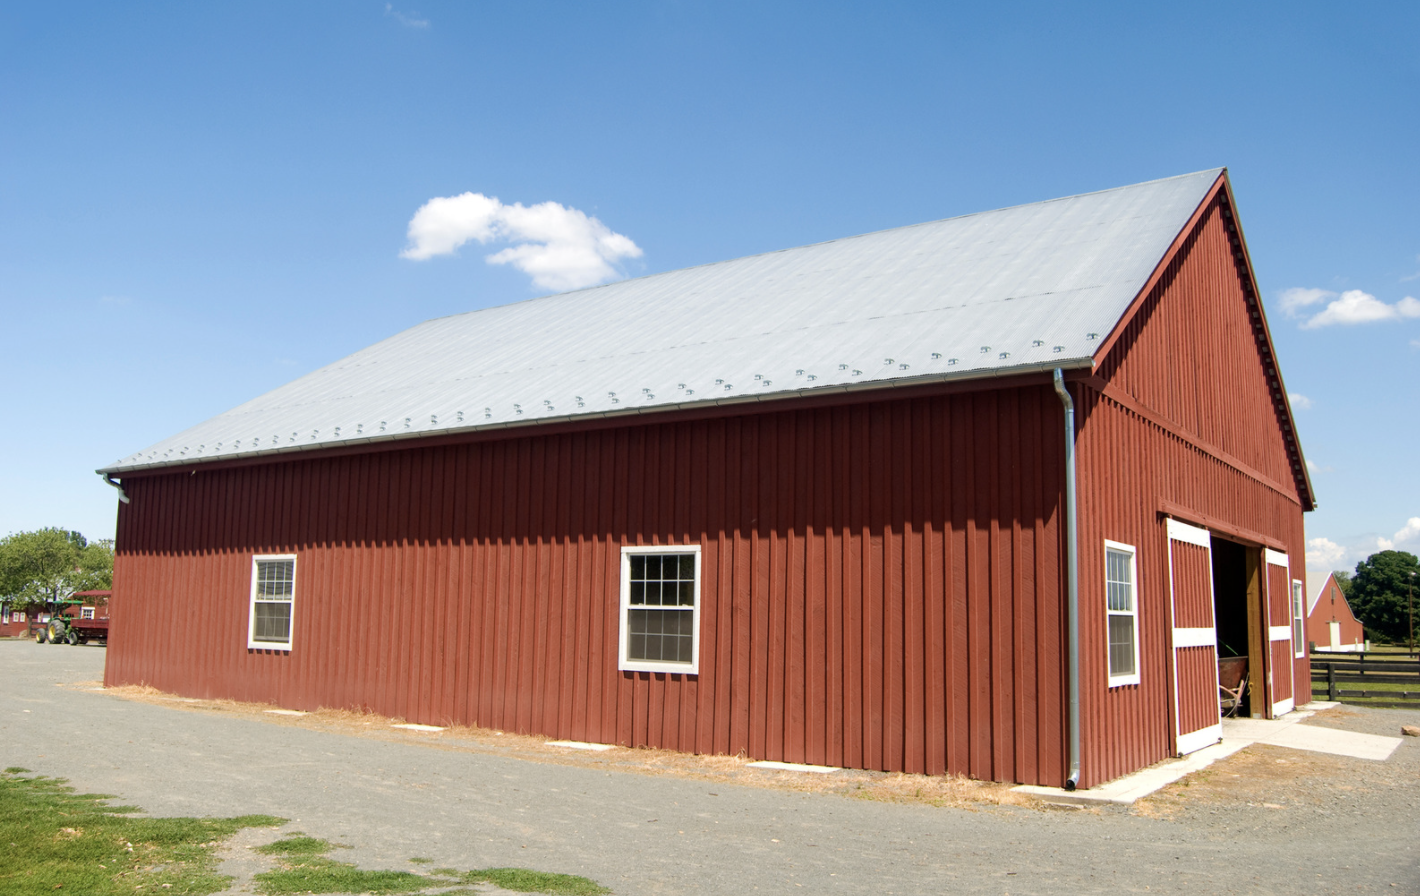 Red barn with a newly installed white rooftop